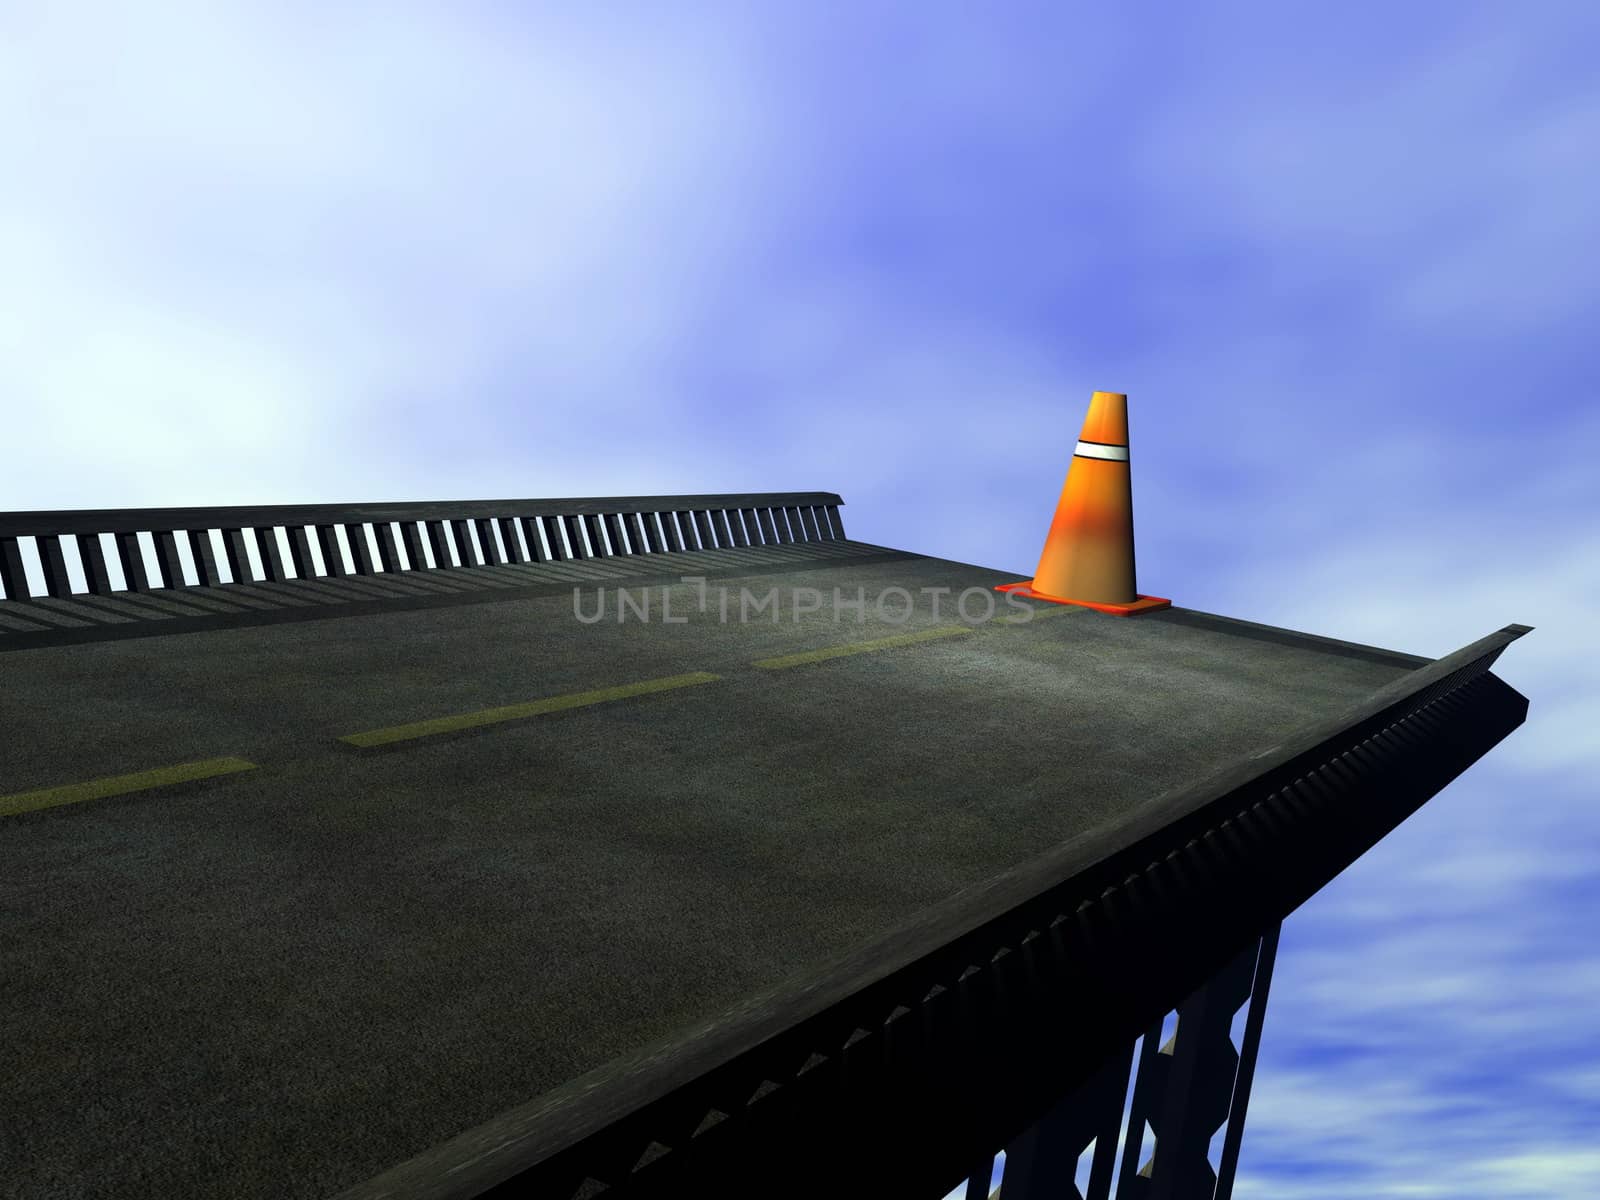 Orange cone standing at the end of road and cloudy blue sky